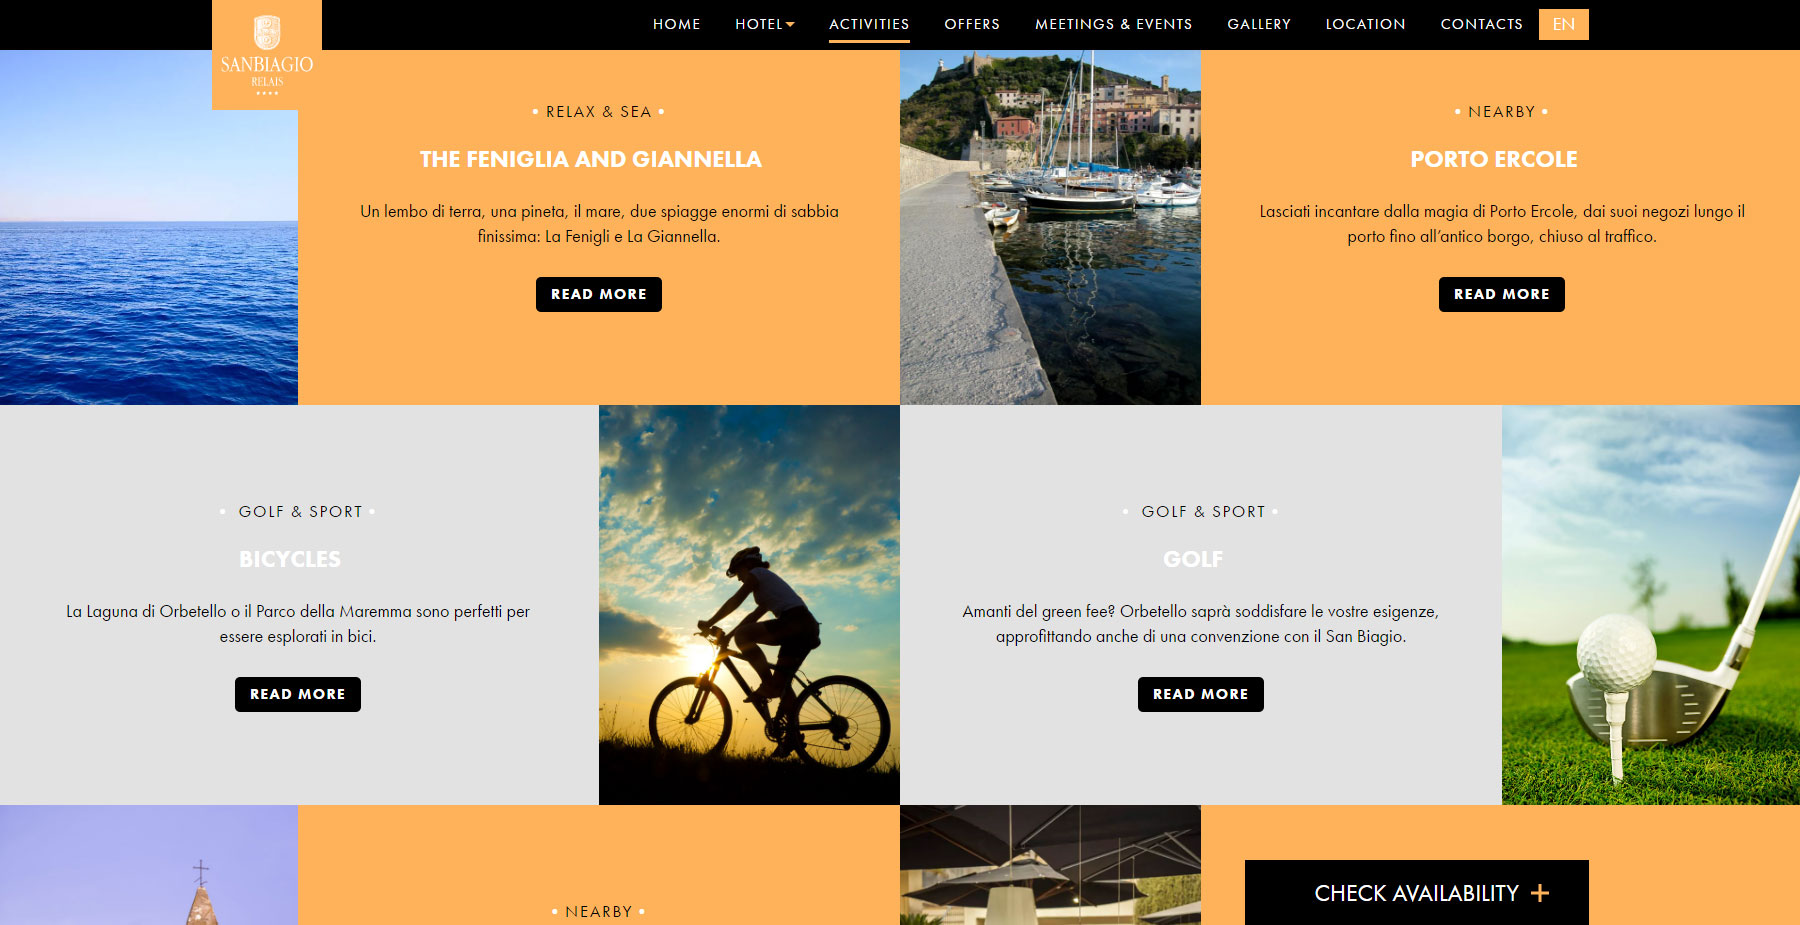 San Biagio Relais - Website of the Day